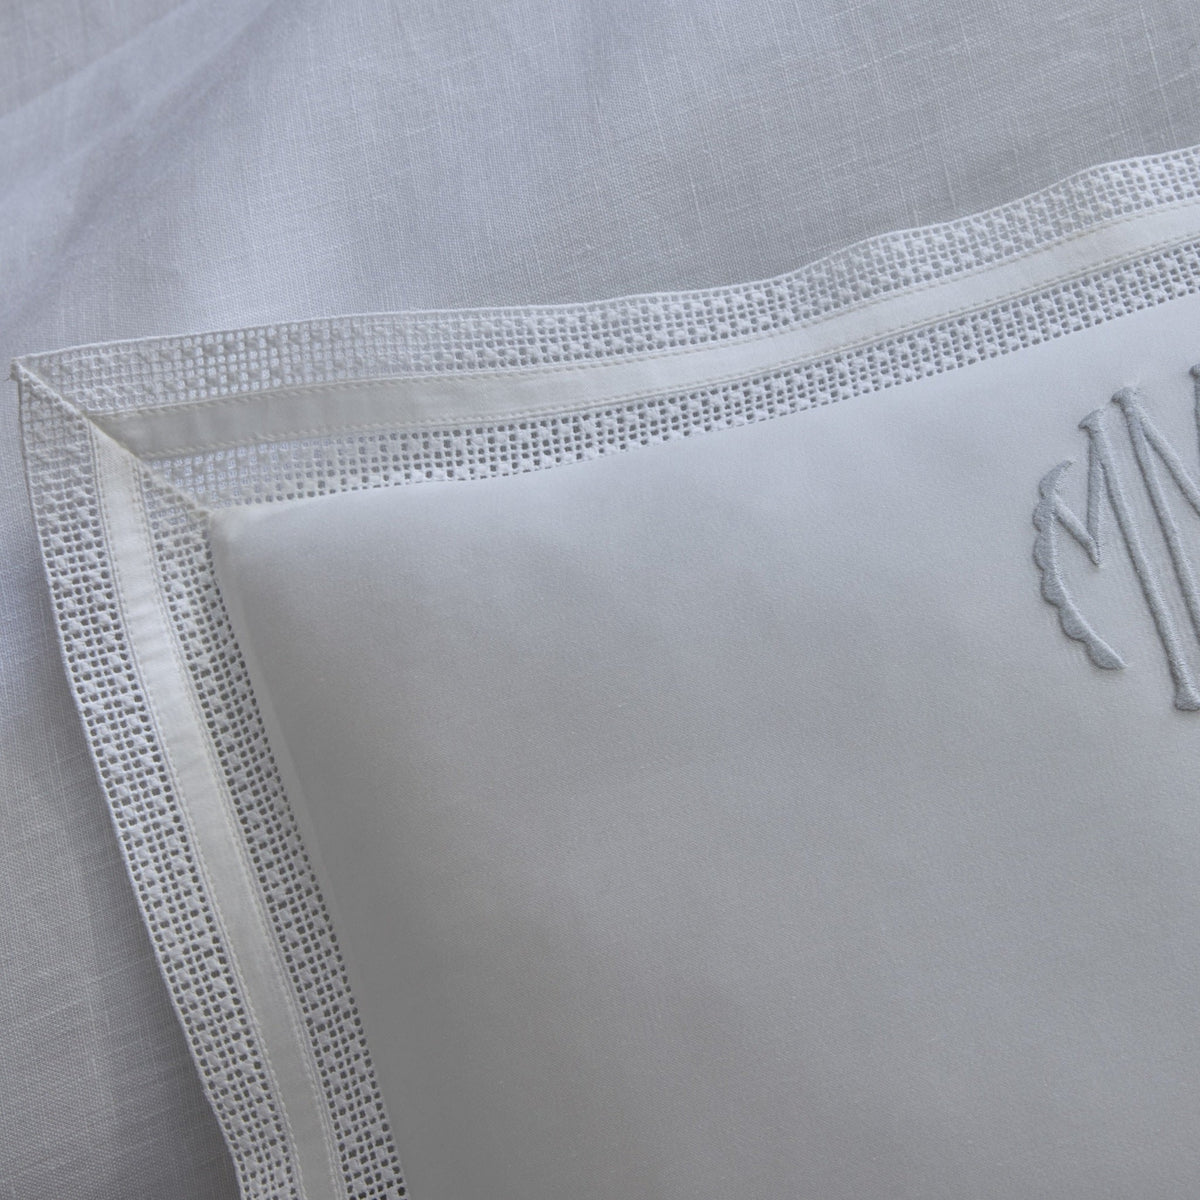 Detail View of a Sham of Matouk Grace Bedding in Color White